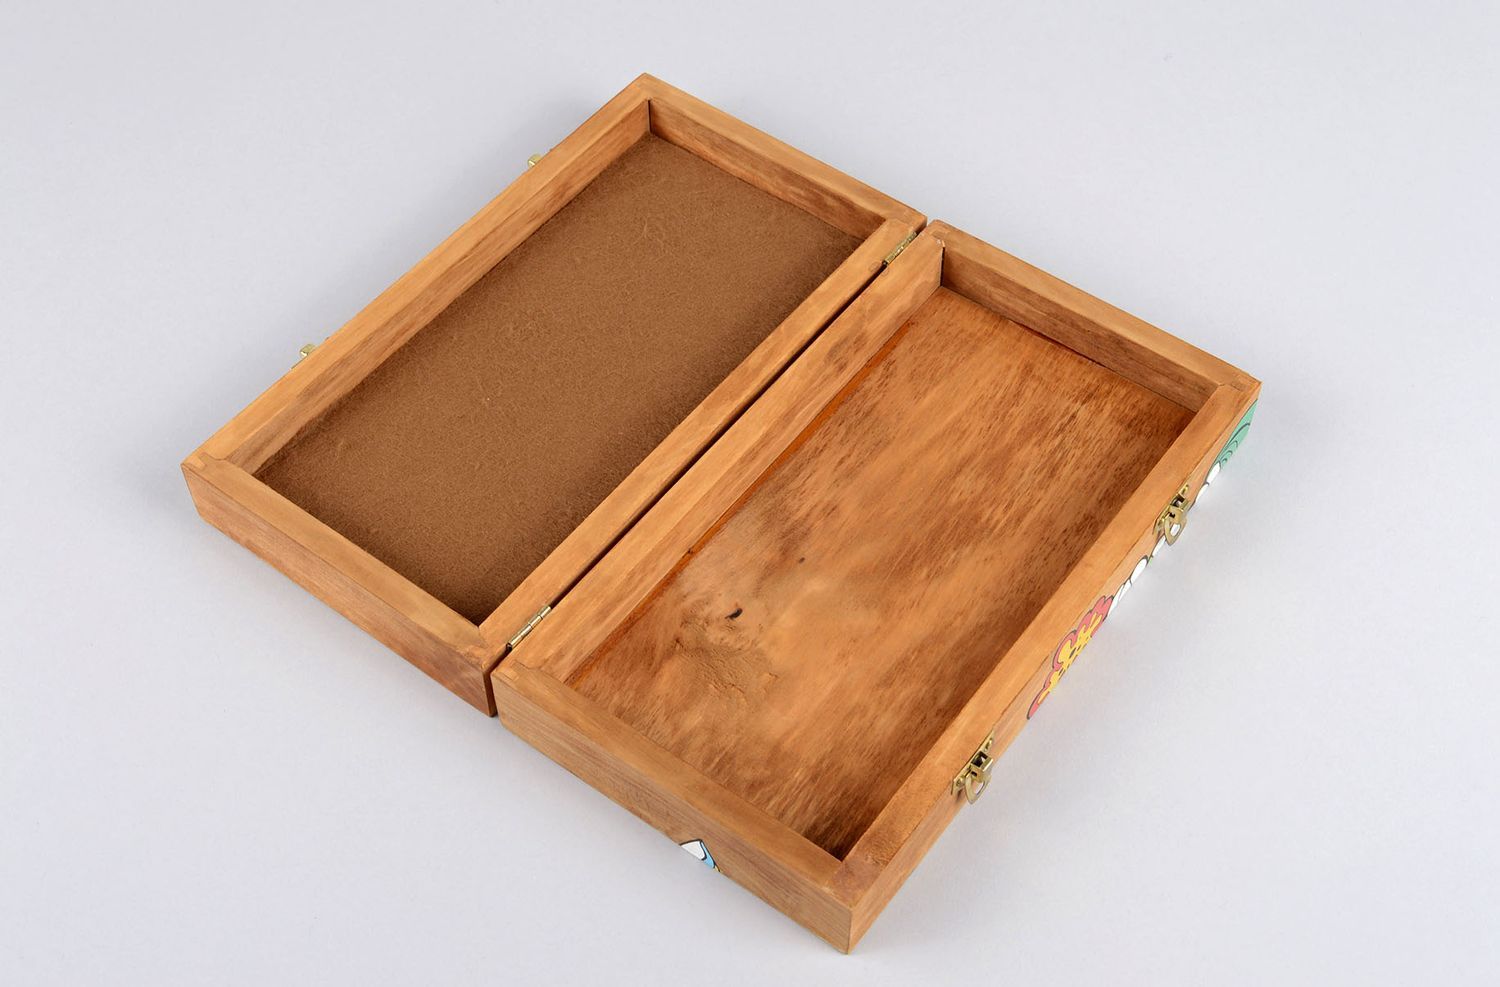 Handmade wooden box jewelry box design modern living room gifts for her photo 3